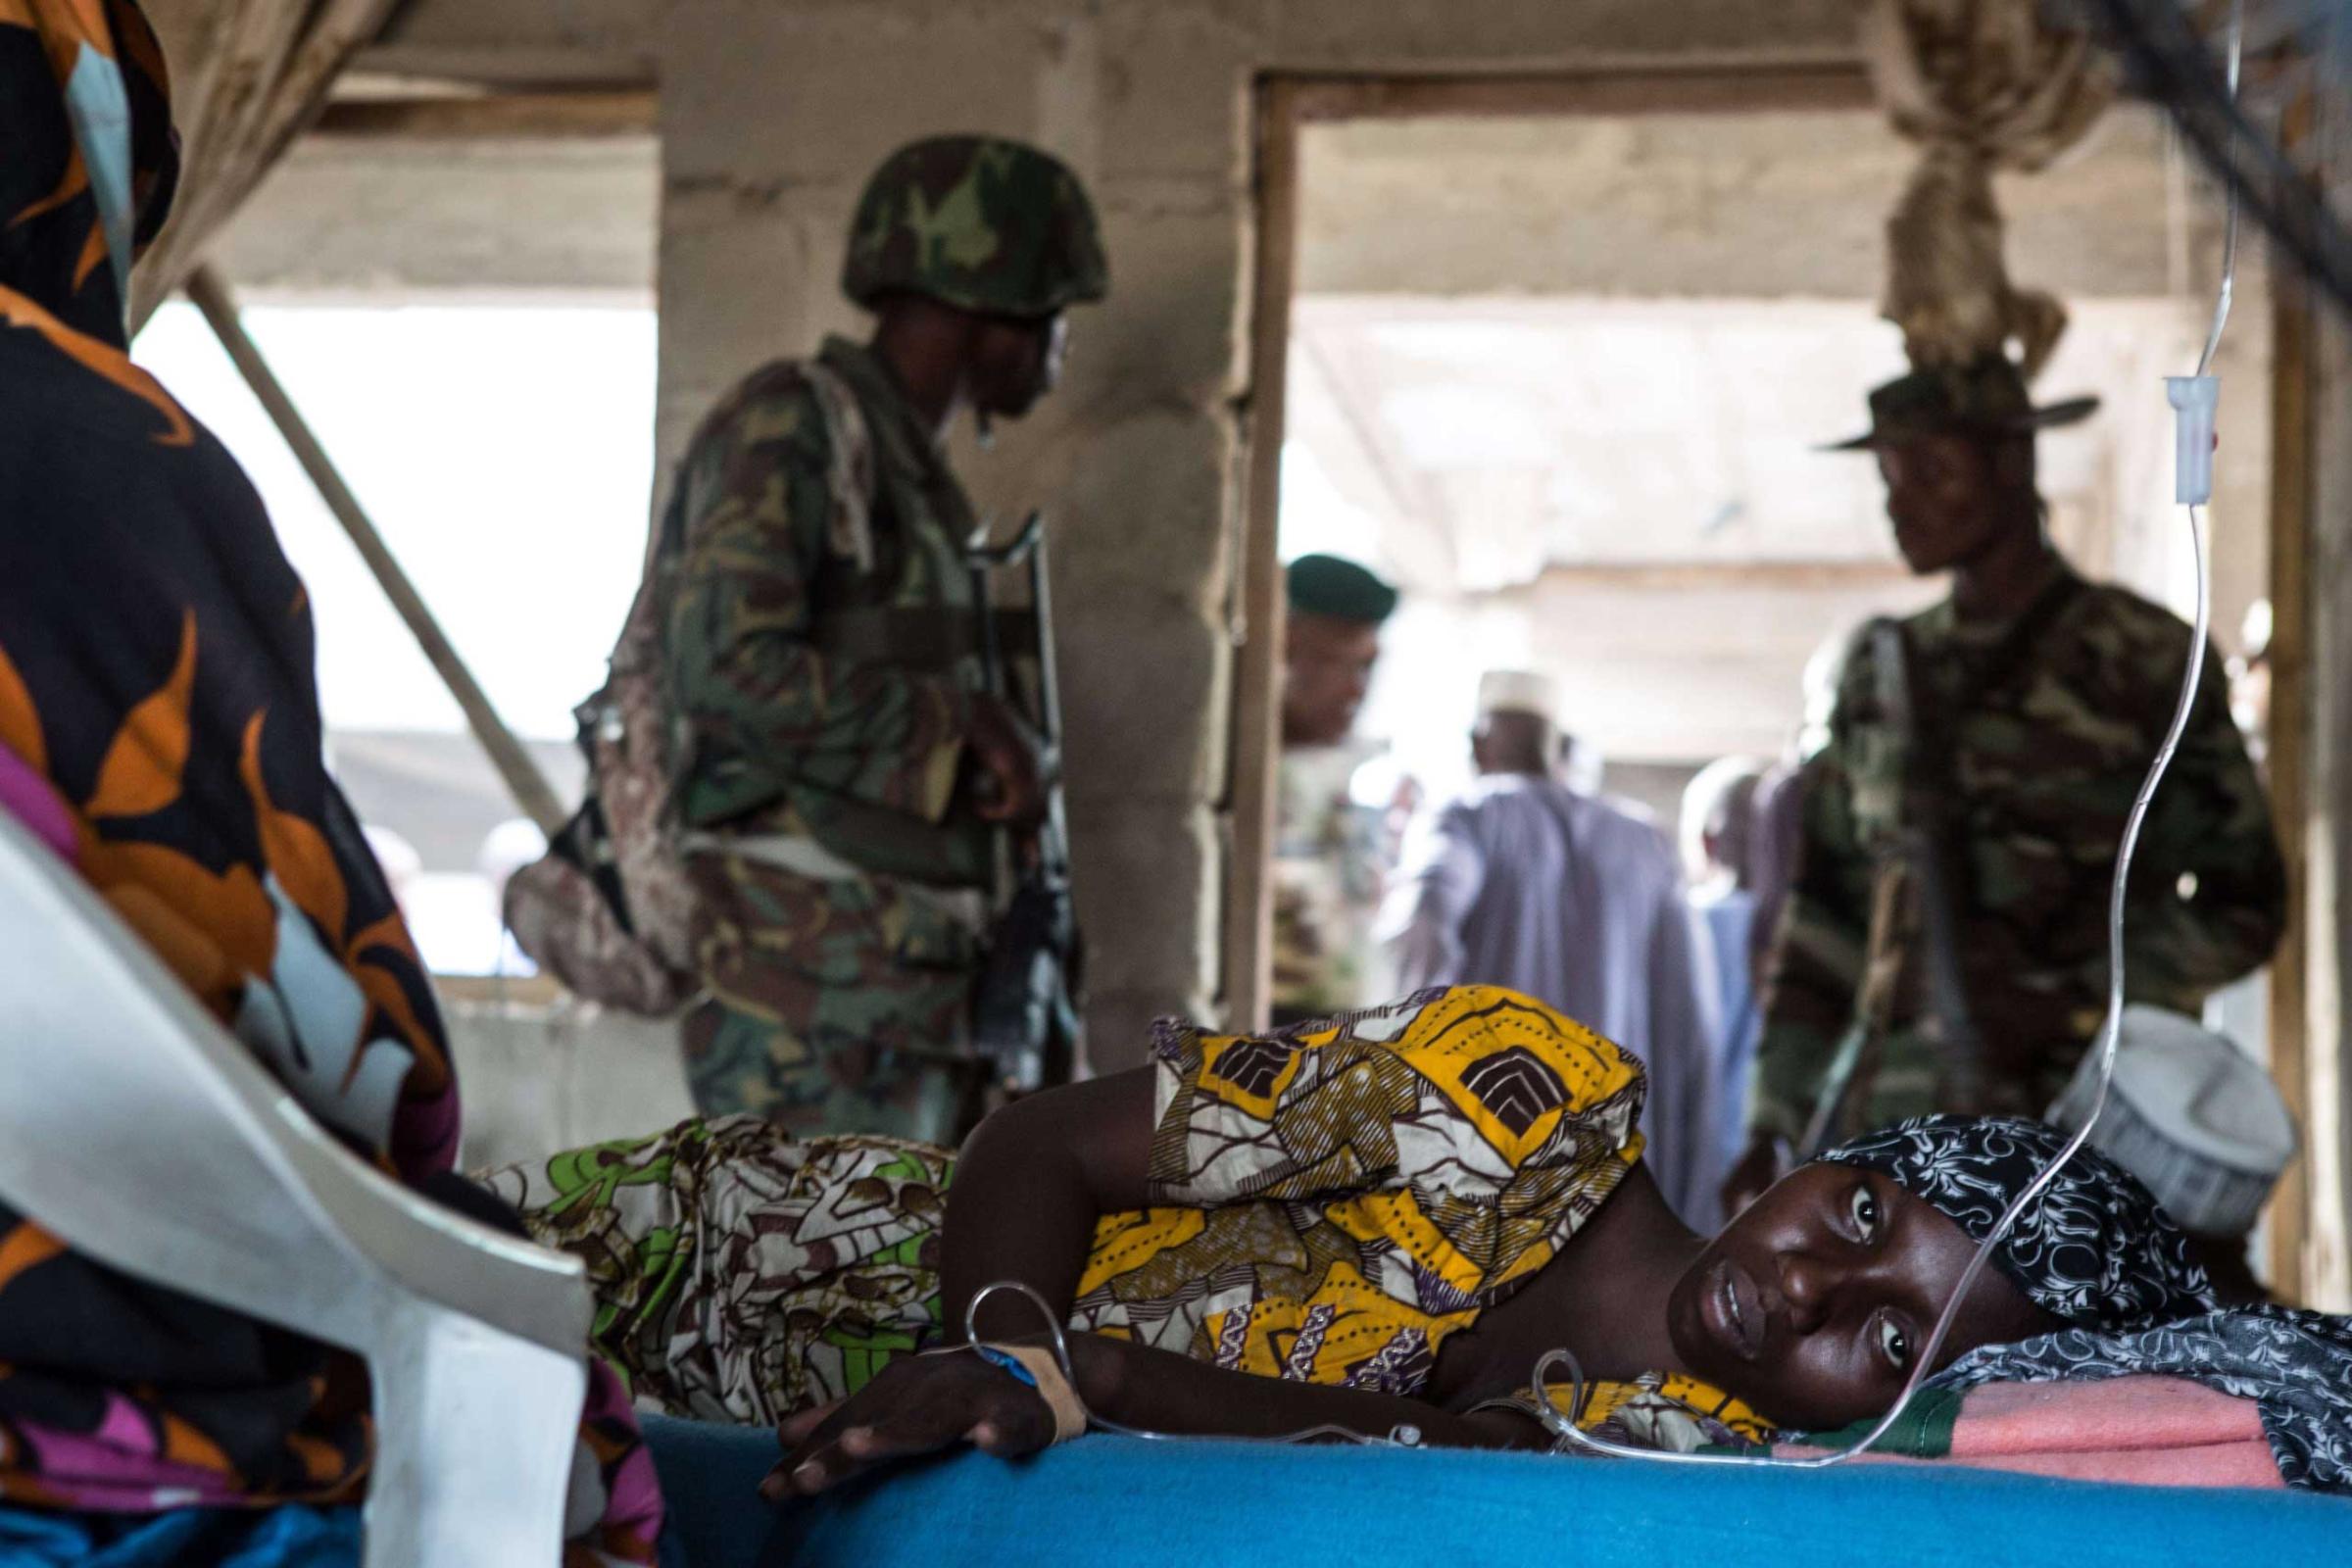 A young woman lies ill in a makeshift hospital room in Maiduguri on March 25, 2015.